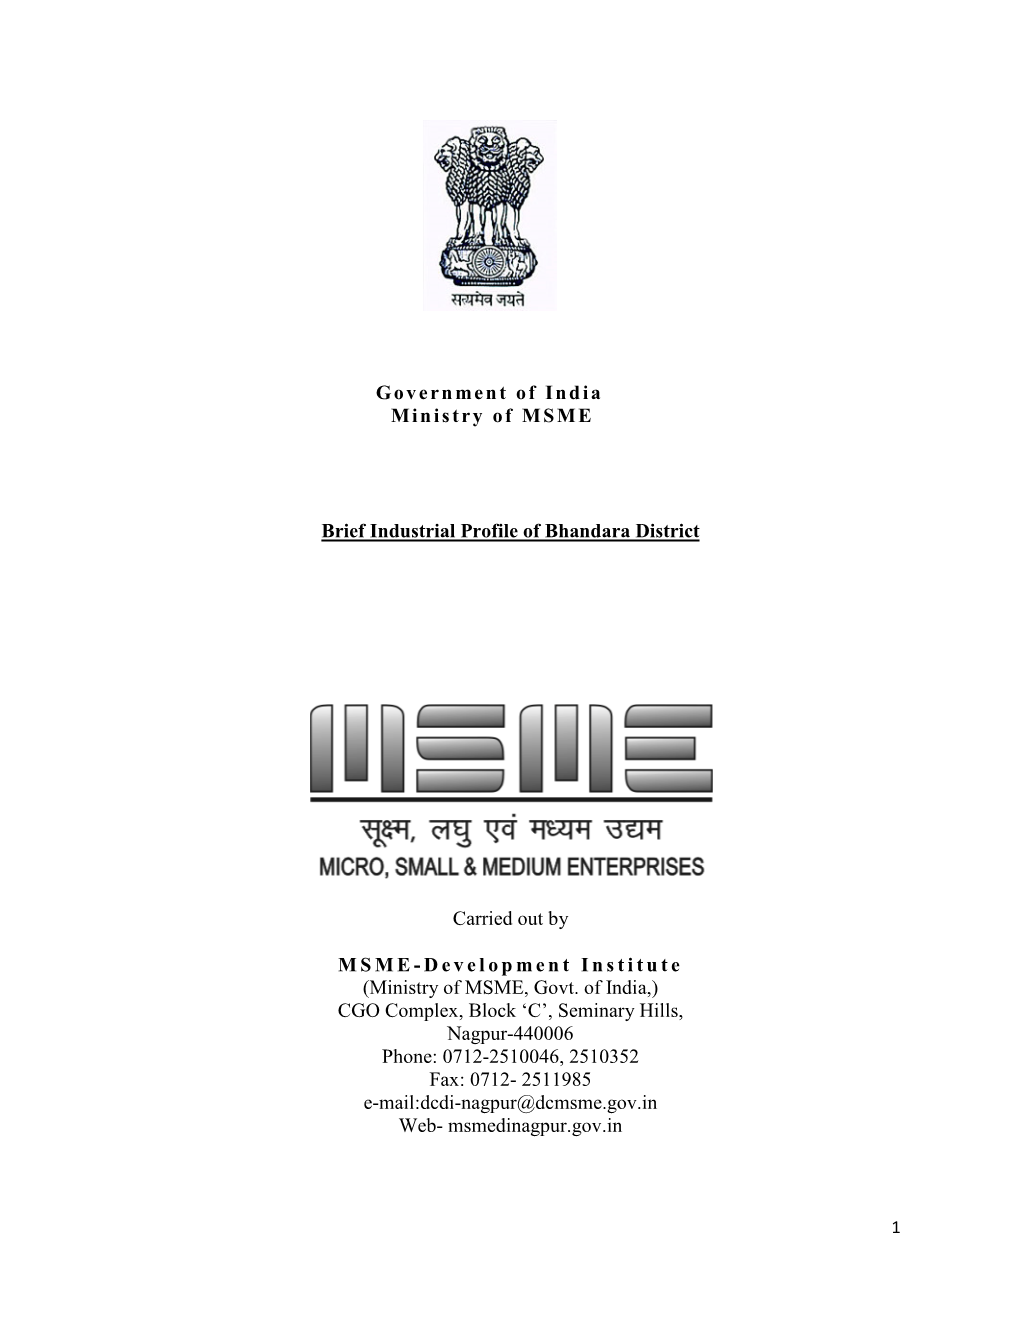 Government of India Ministry of MSME Brief Industrial Profile of Bhandara